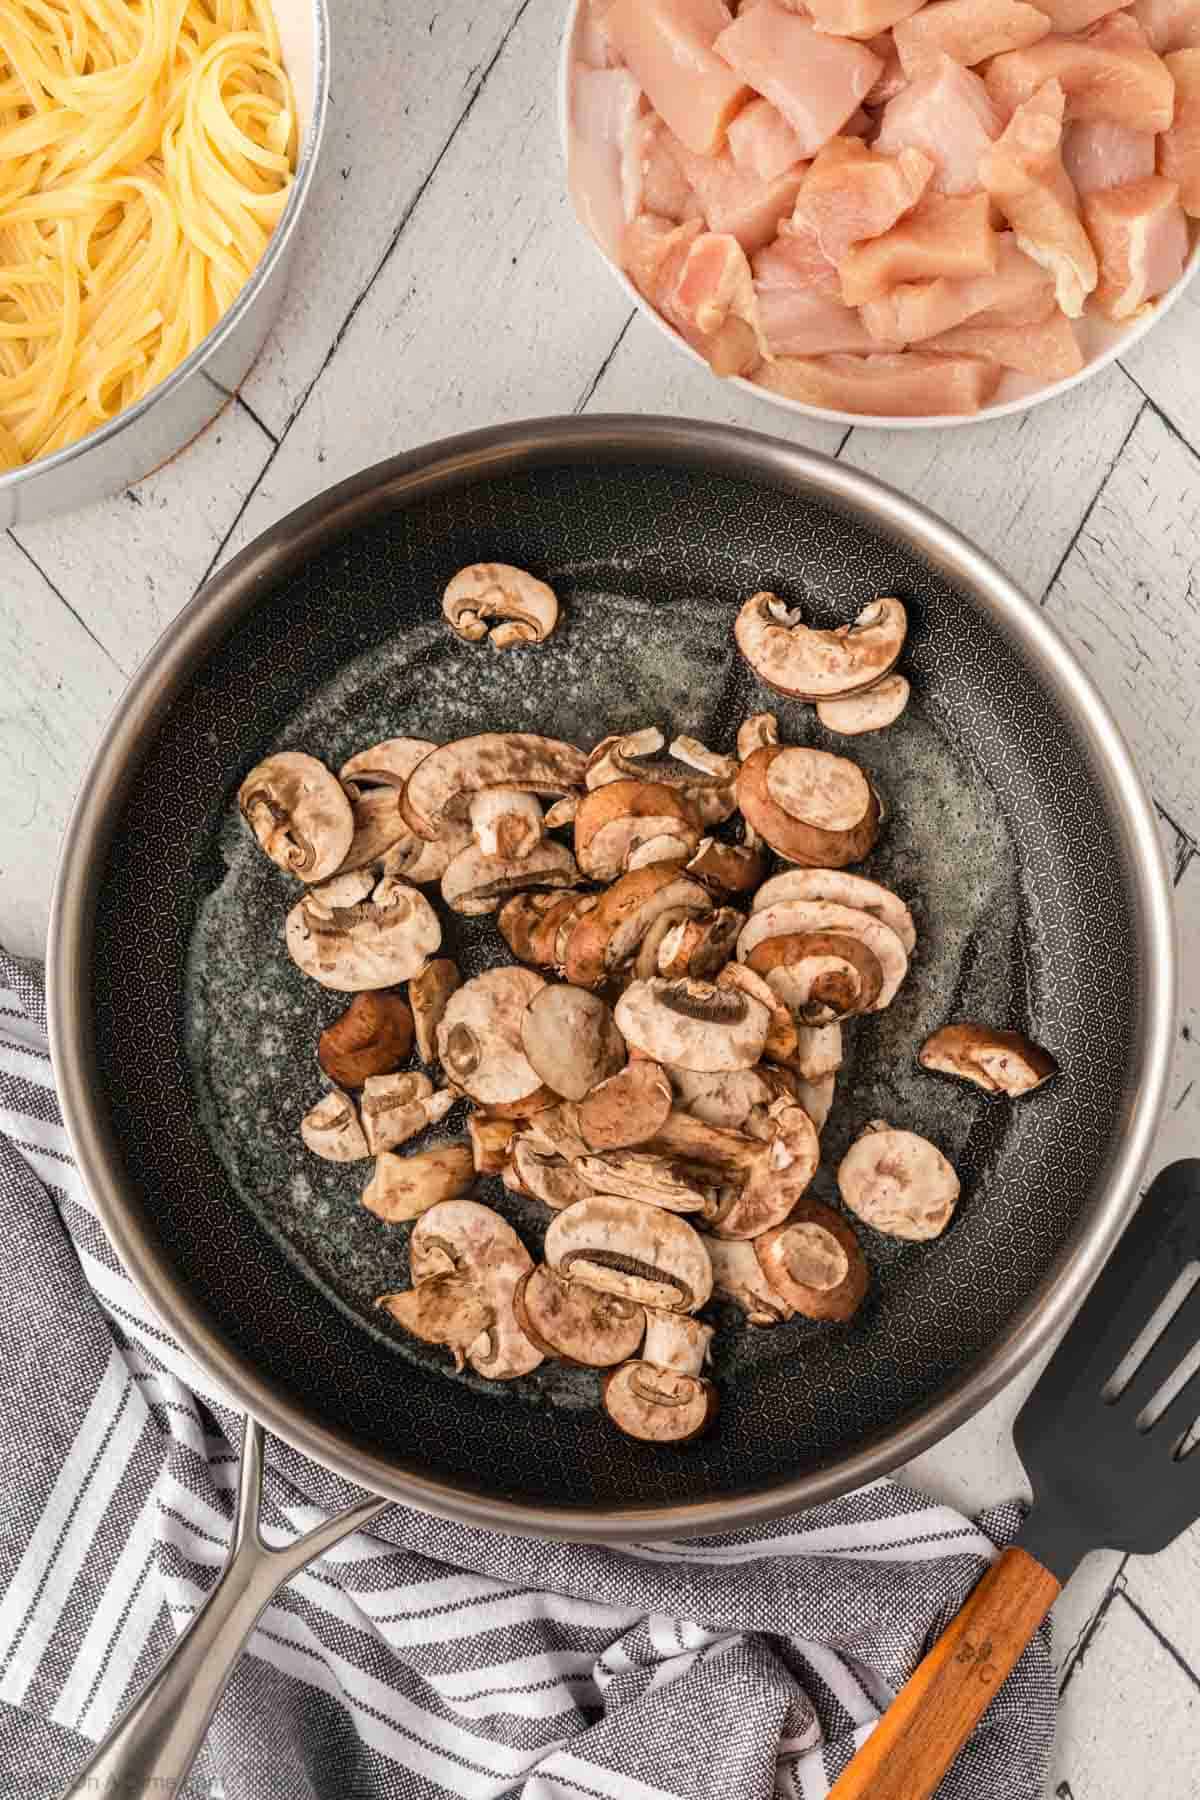 Cooking the slice mushrooms in a skillet